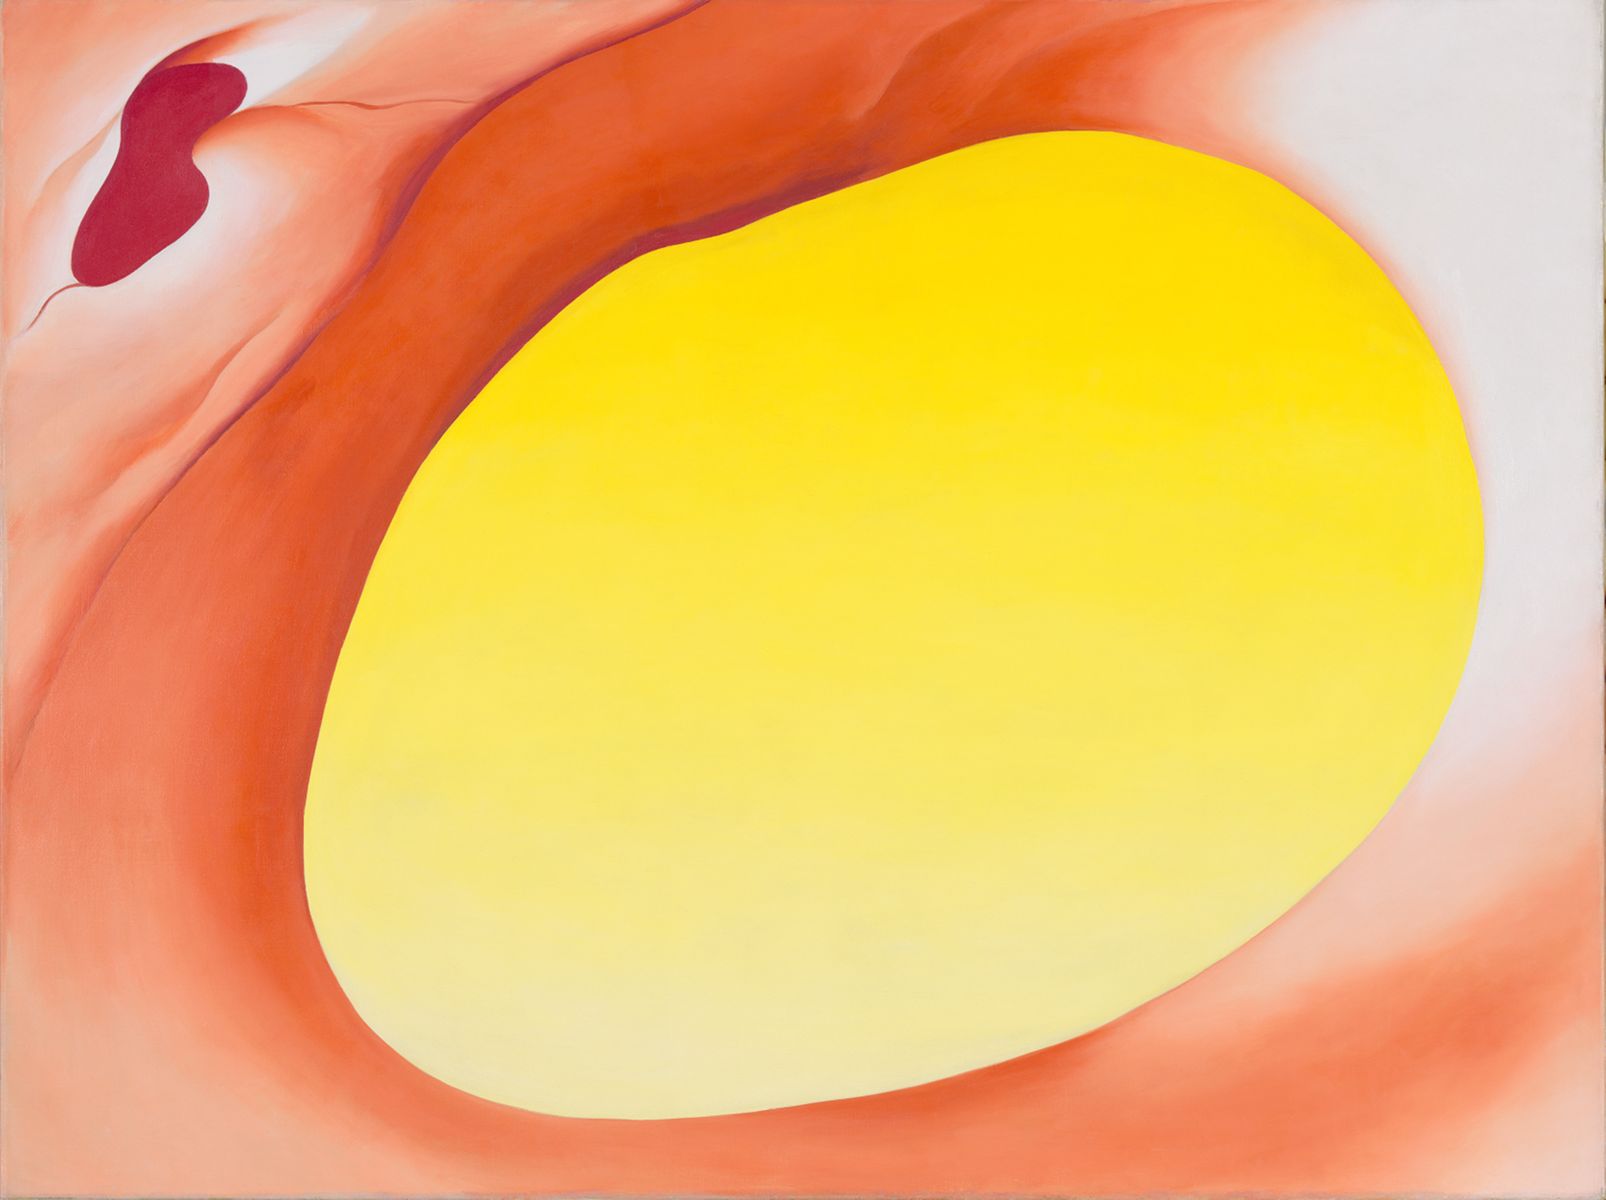 Painting. A vibrant yellow, egg-shaped form is surrounded in bands of apricot and saffron orange. The egg tips up and to our right. Along the top, left, and bottom edges, it seems cushioned into a field of a darker orange, which is painted with blended strokes to give it a soft look. The orange fades to white at the top right corner and down the right side. In the top left corner, a magenta-pink, bean-shaped form is nestled into a lighter peach area. Two lines of deep pink stretch from the bean form, like blood vessels.